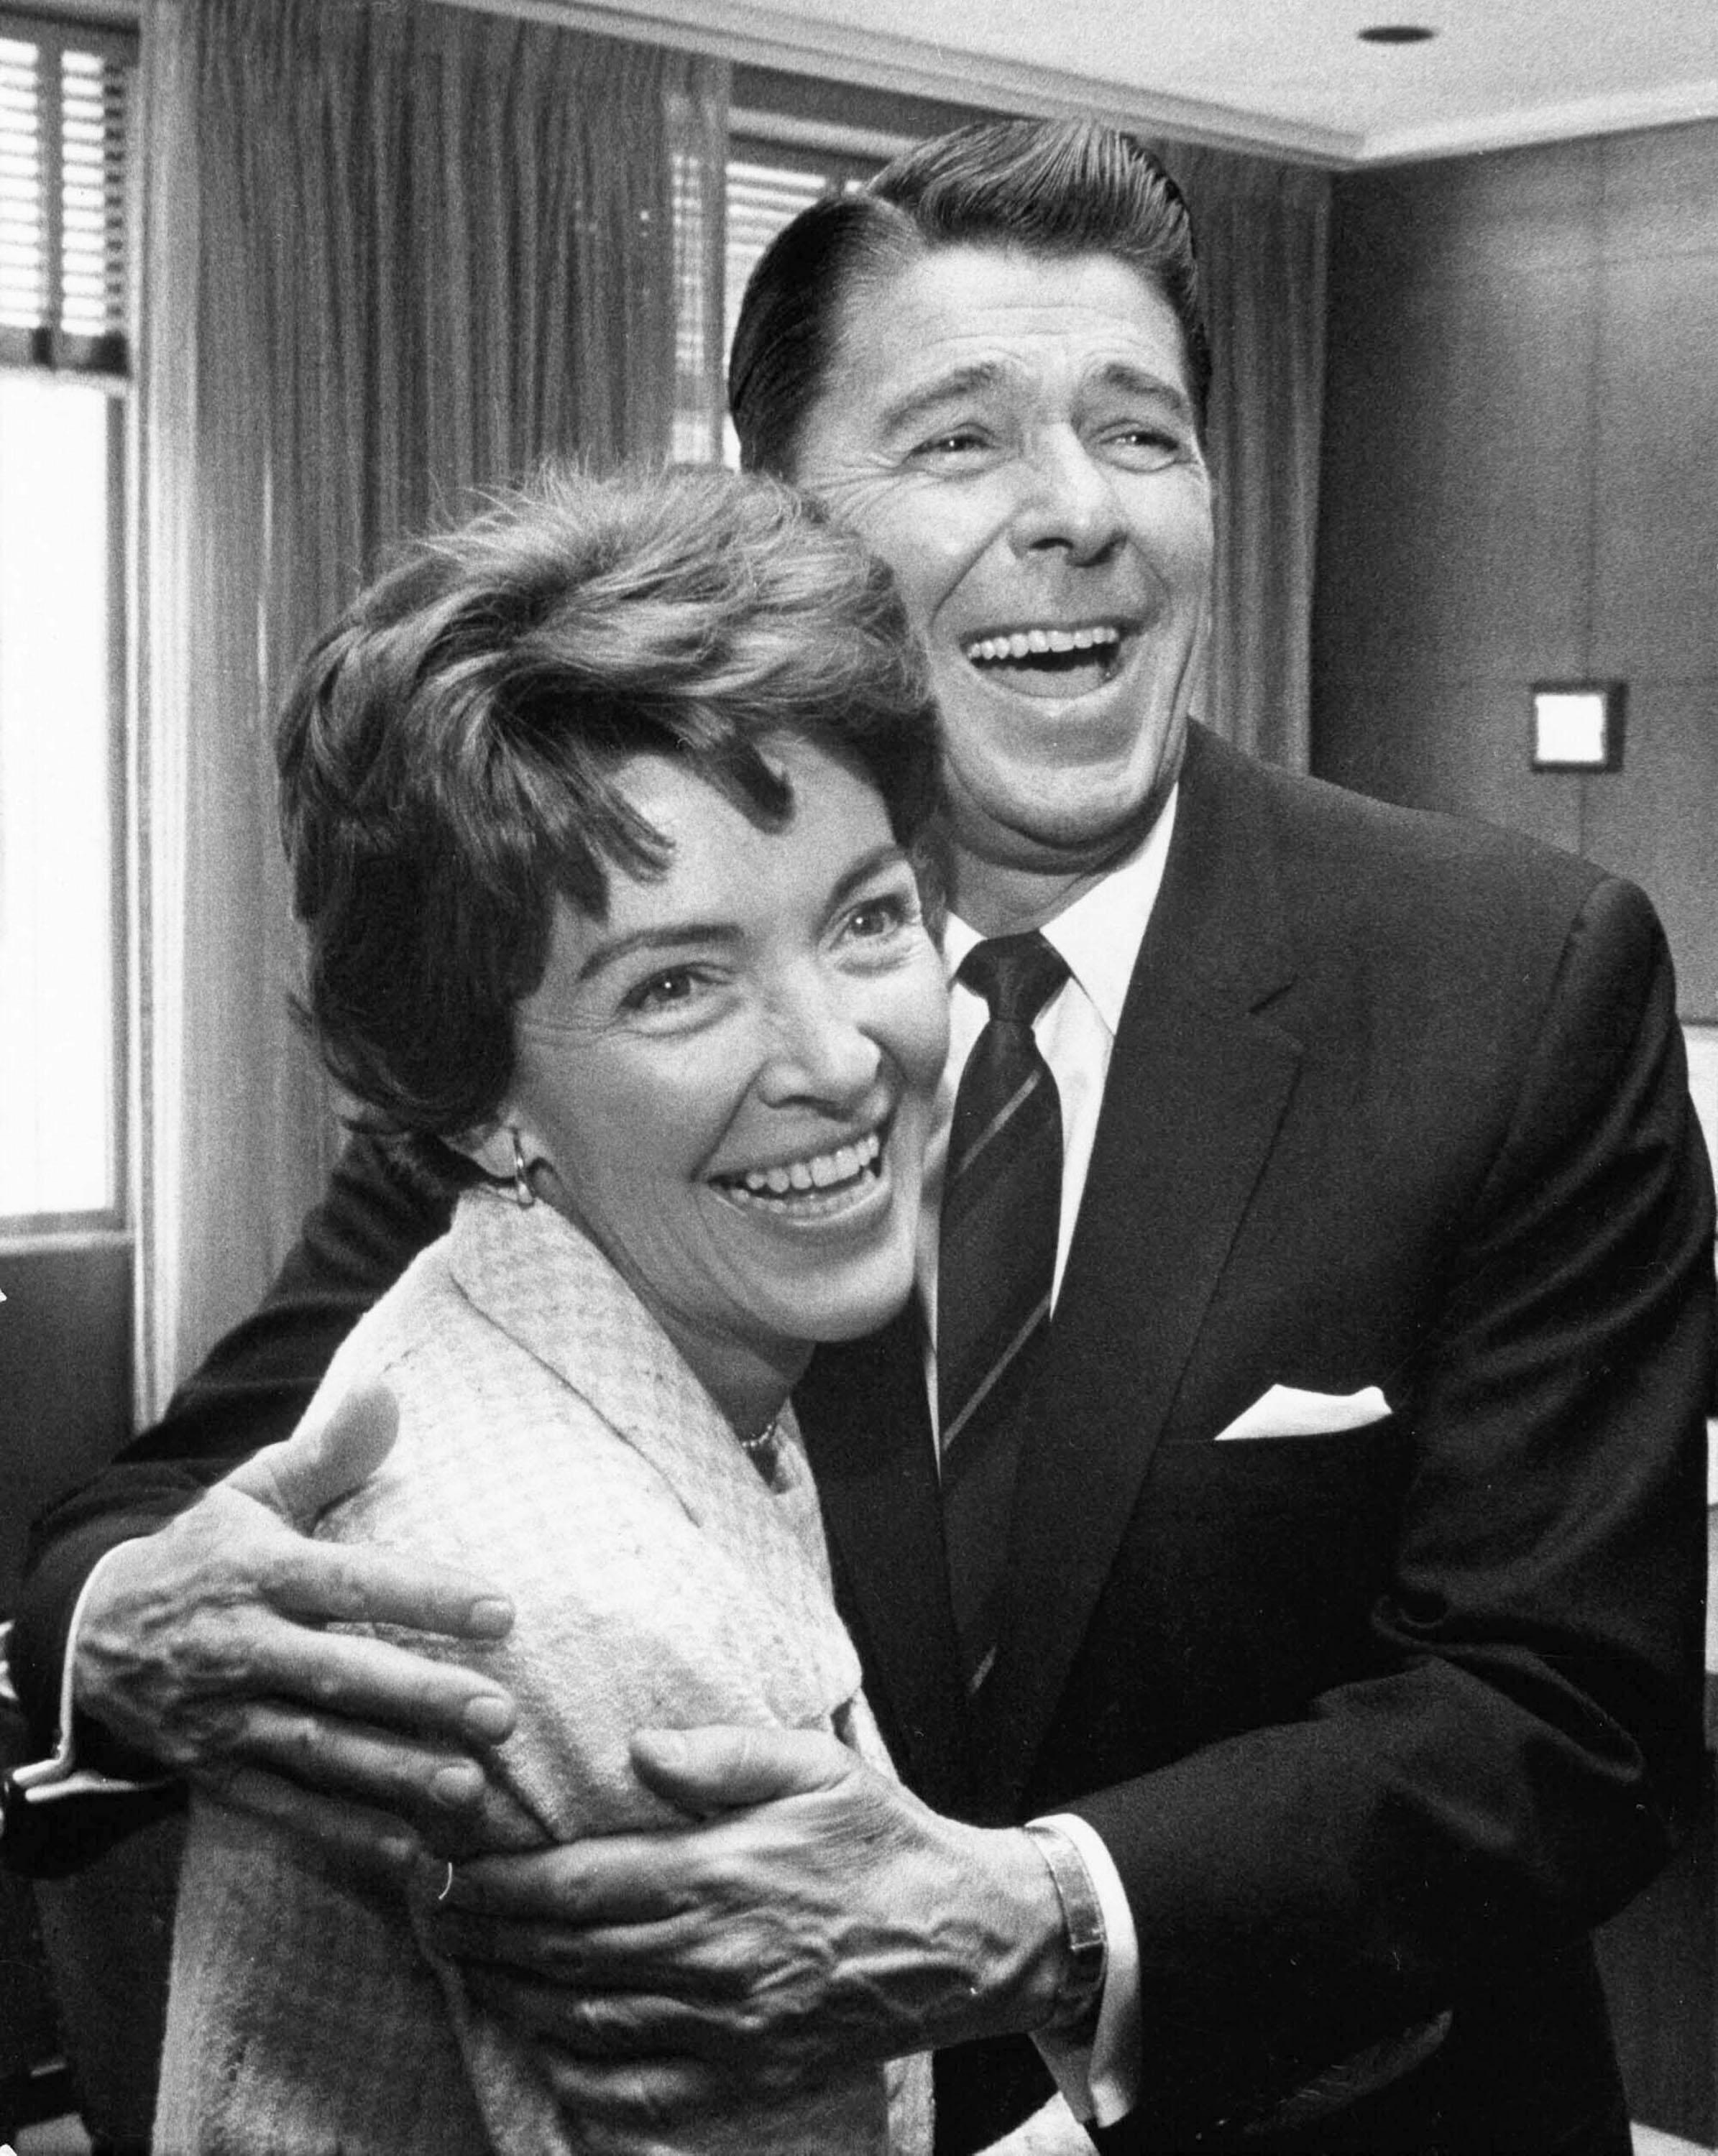 Nancy Reagan history the real story of her time in Hollywood. pic